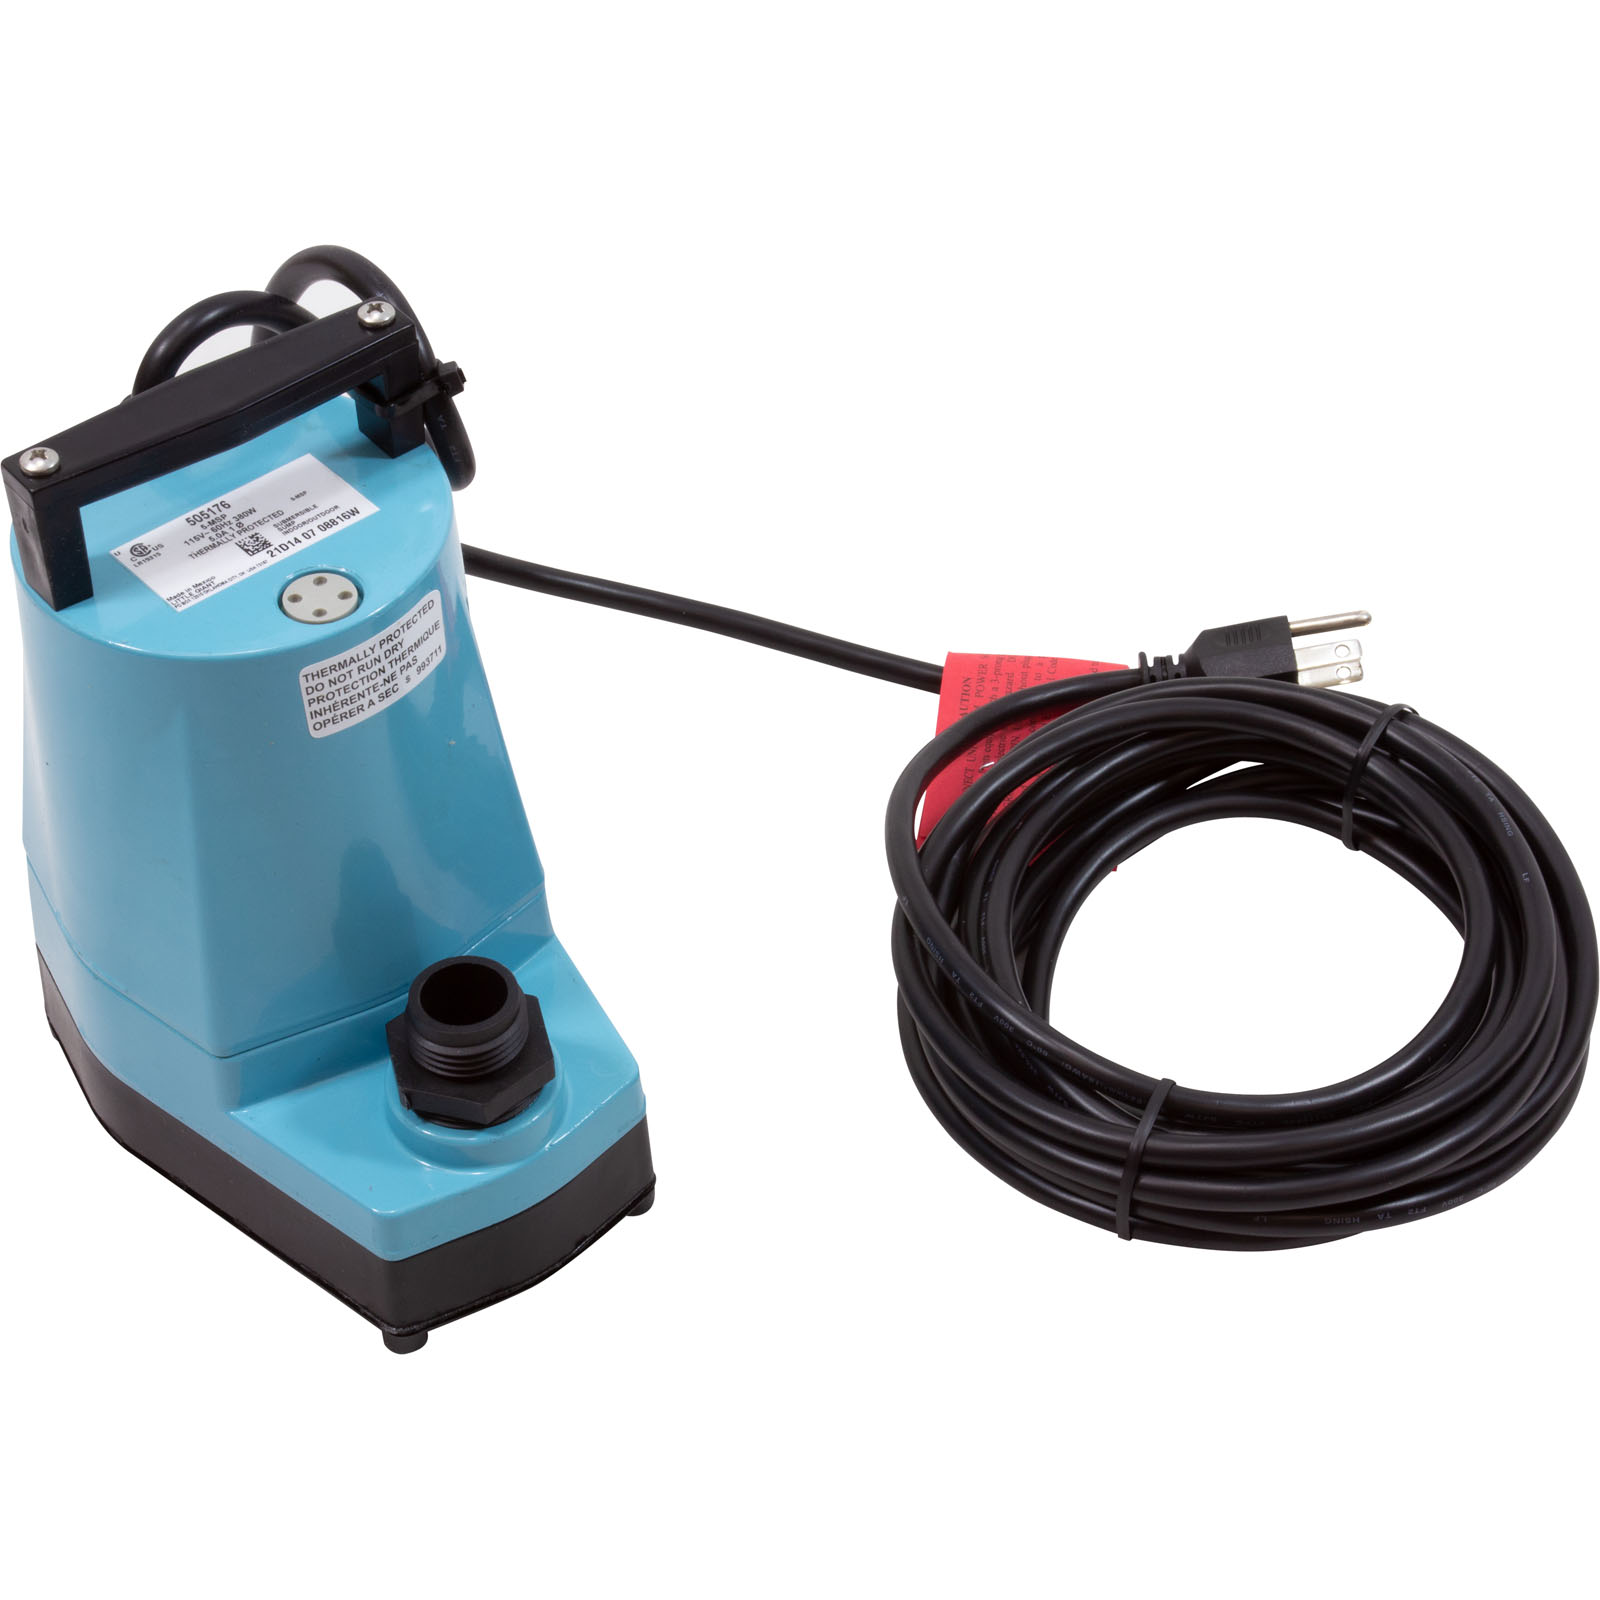 Little Giant Manufacturing Pump, Submersible, Little Giant 5-MSP, 1/6hp, 115v, 1"fpt, 25ft